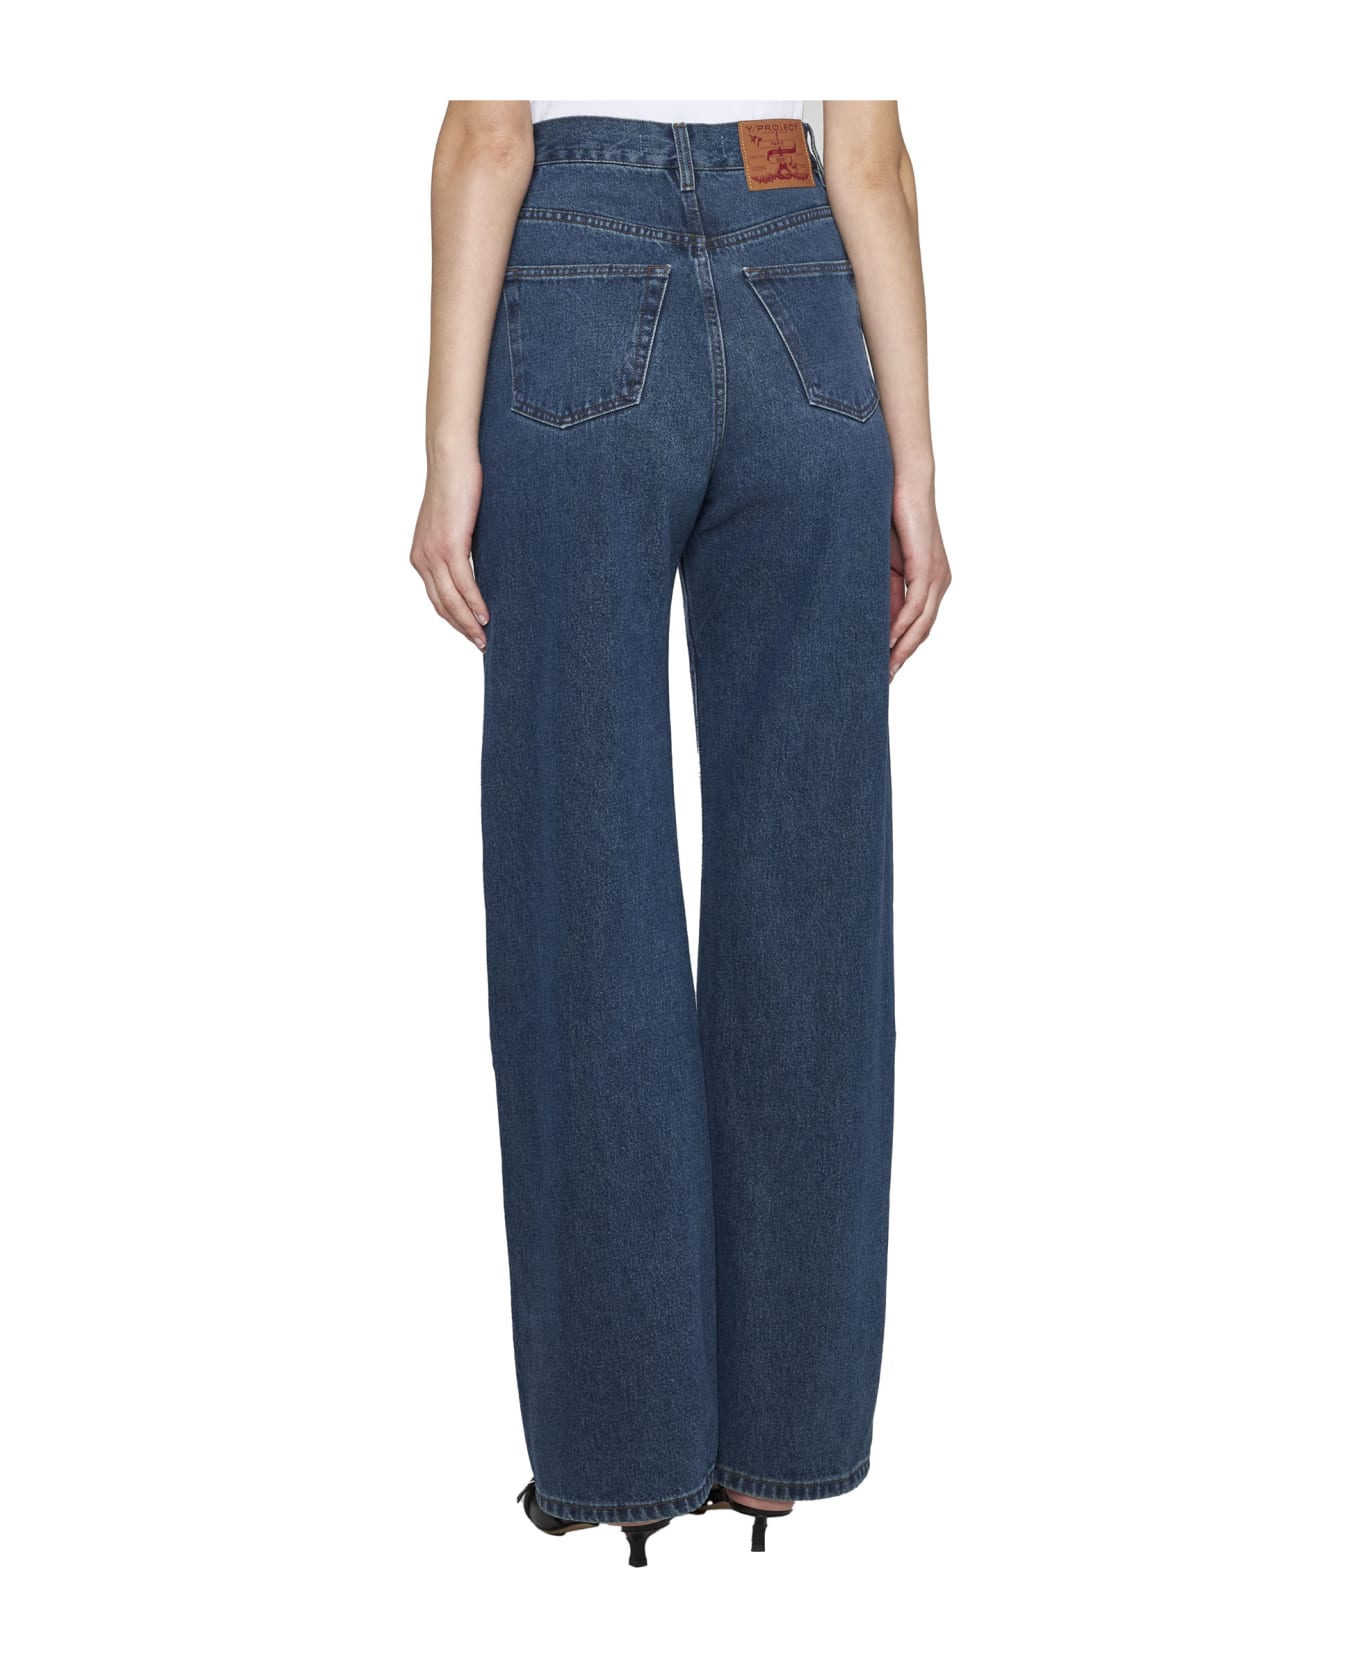 Y/Project Jeans - Evergreen vintage blue